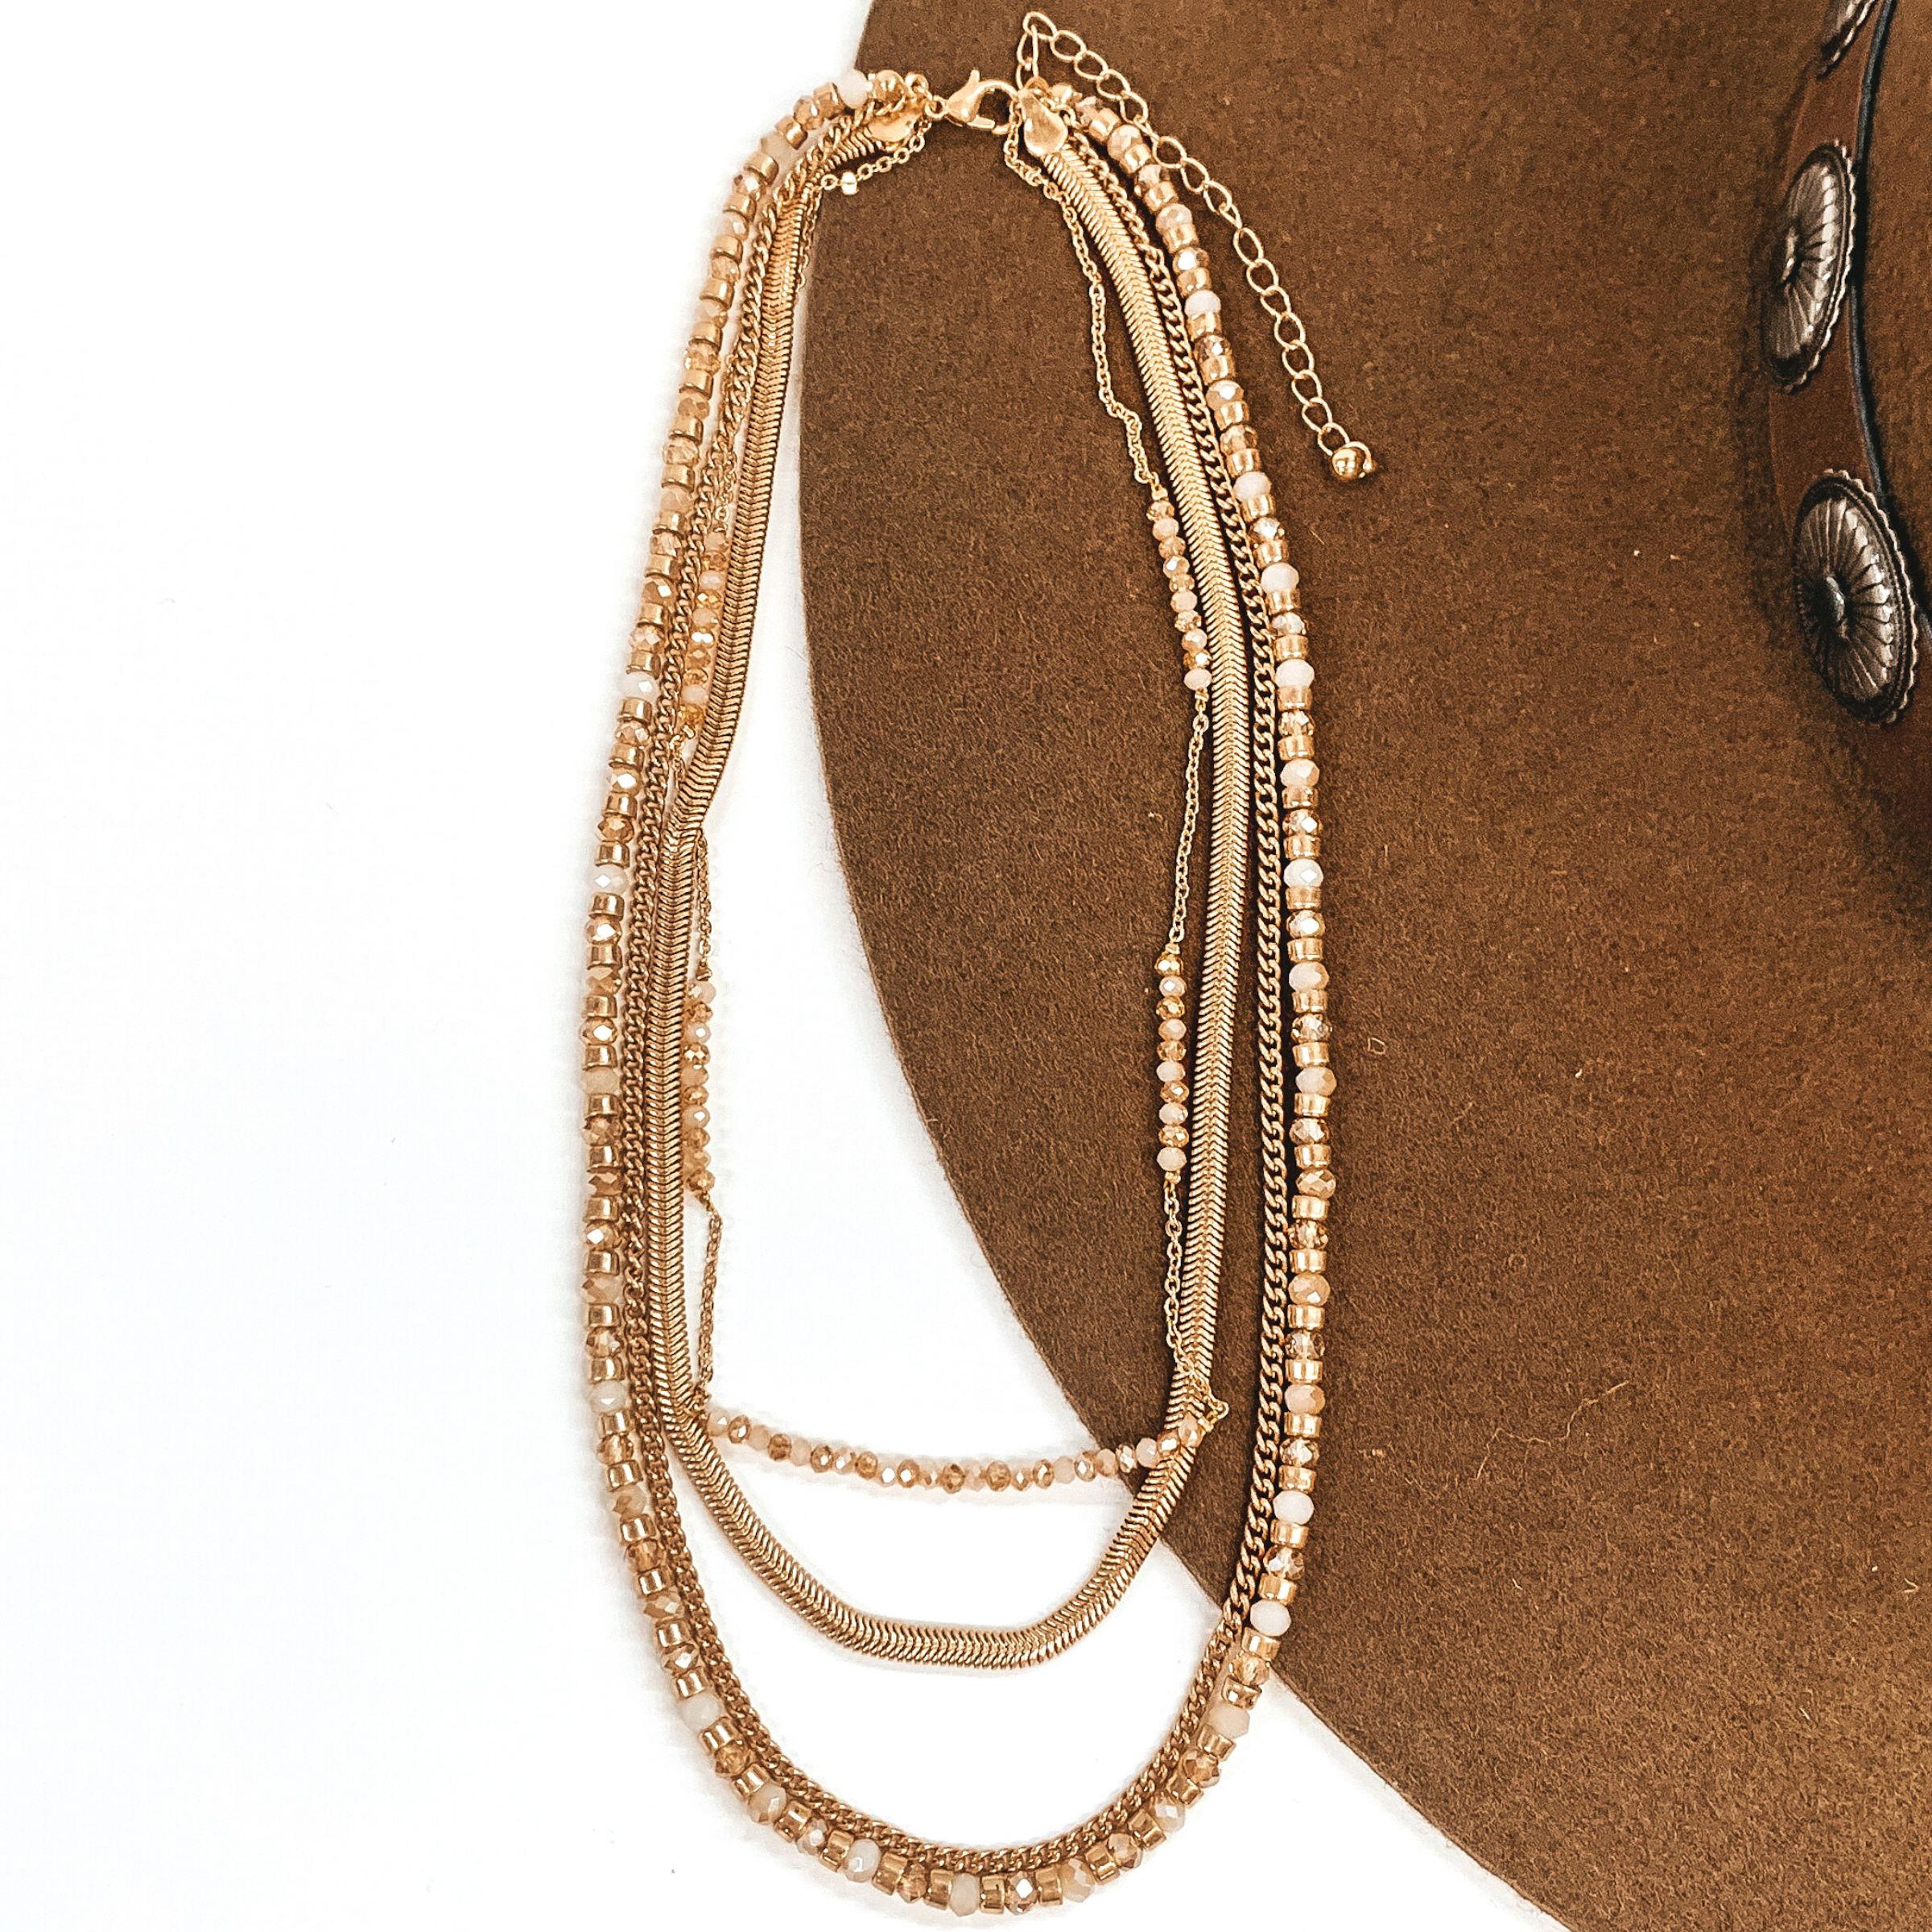 Four Strand Chain and Beaded Necklace in Gold Tone - Giddy Up Glamour Boutique